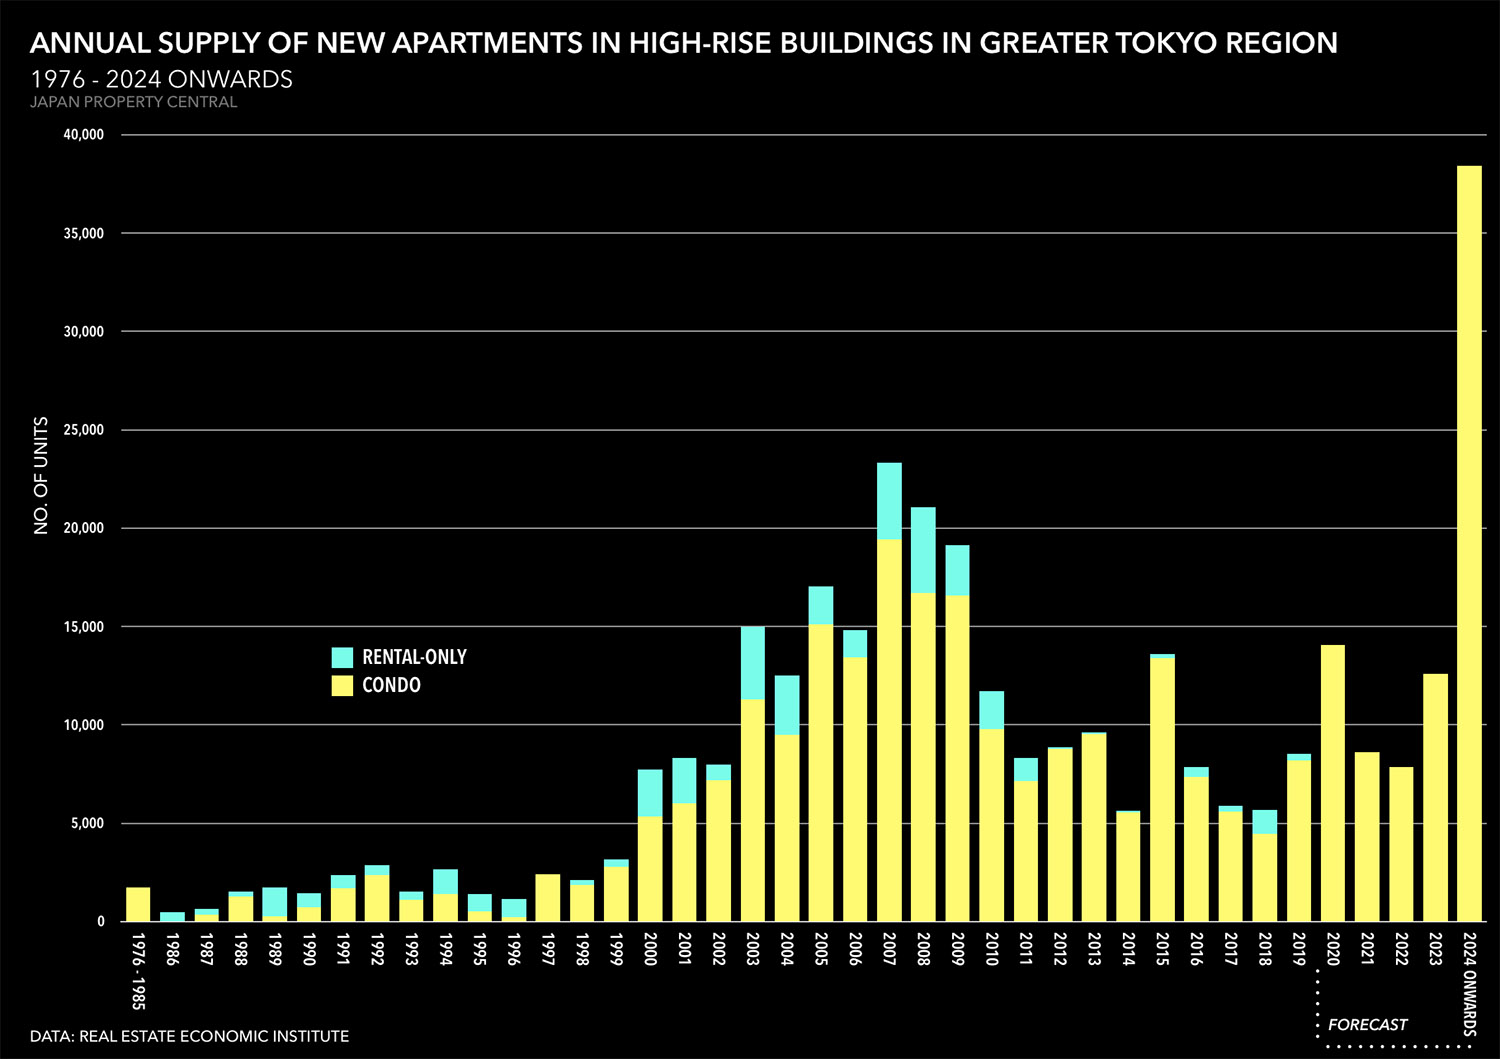 Japan’s highrise apartment market from 2020 to 2024 onwards